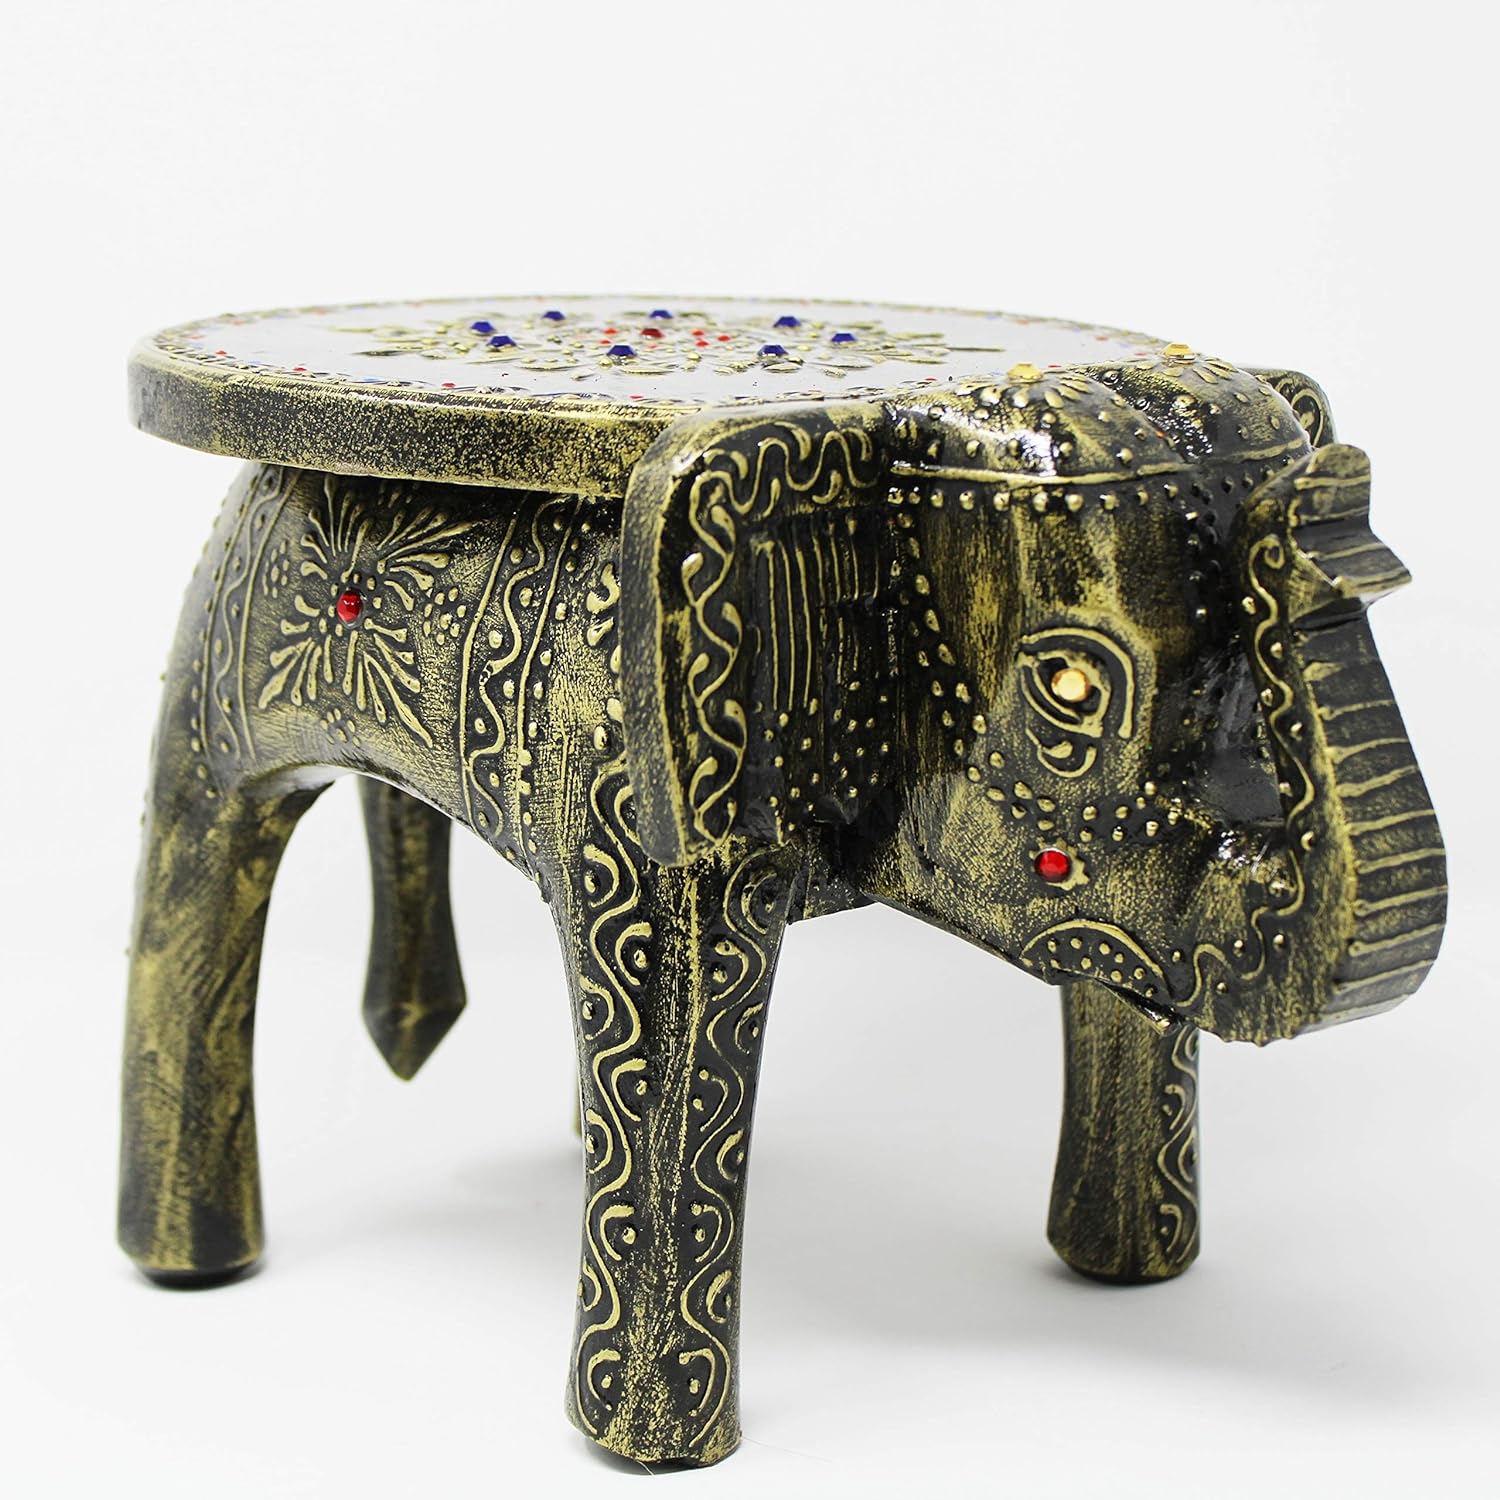 Hand-Painted Colorful Wooden Elephant Stool (Antique Finish)